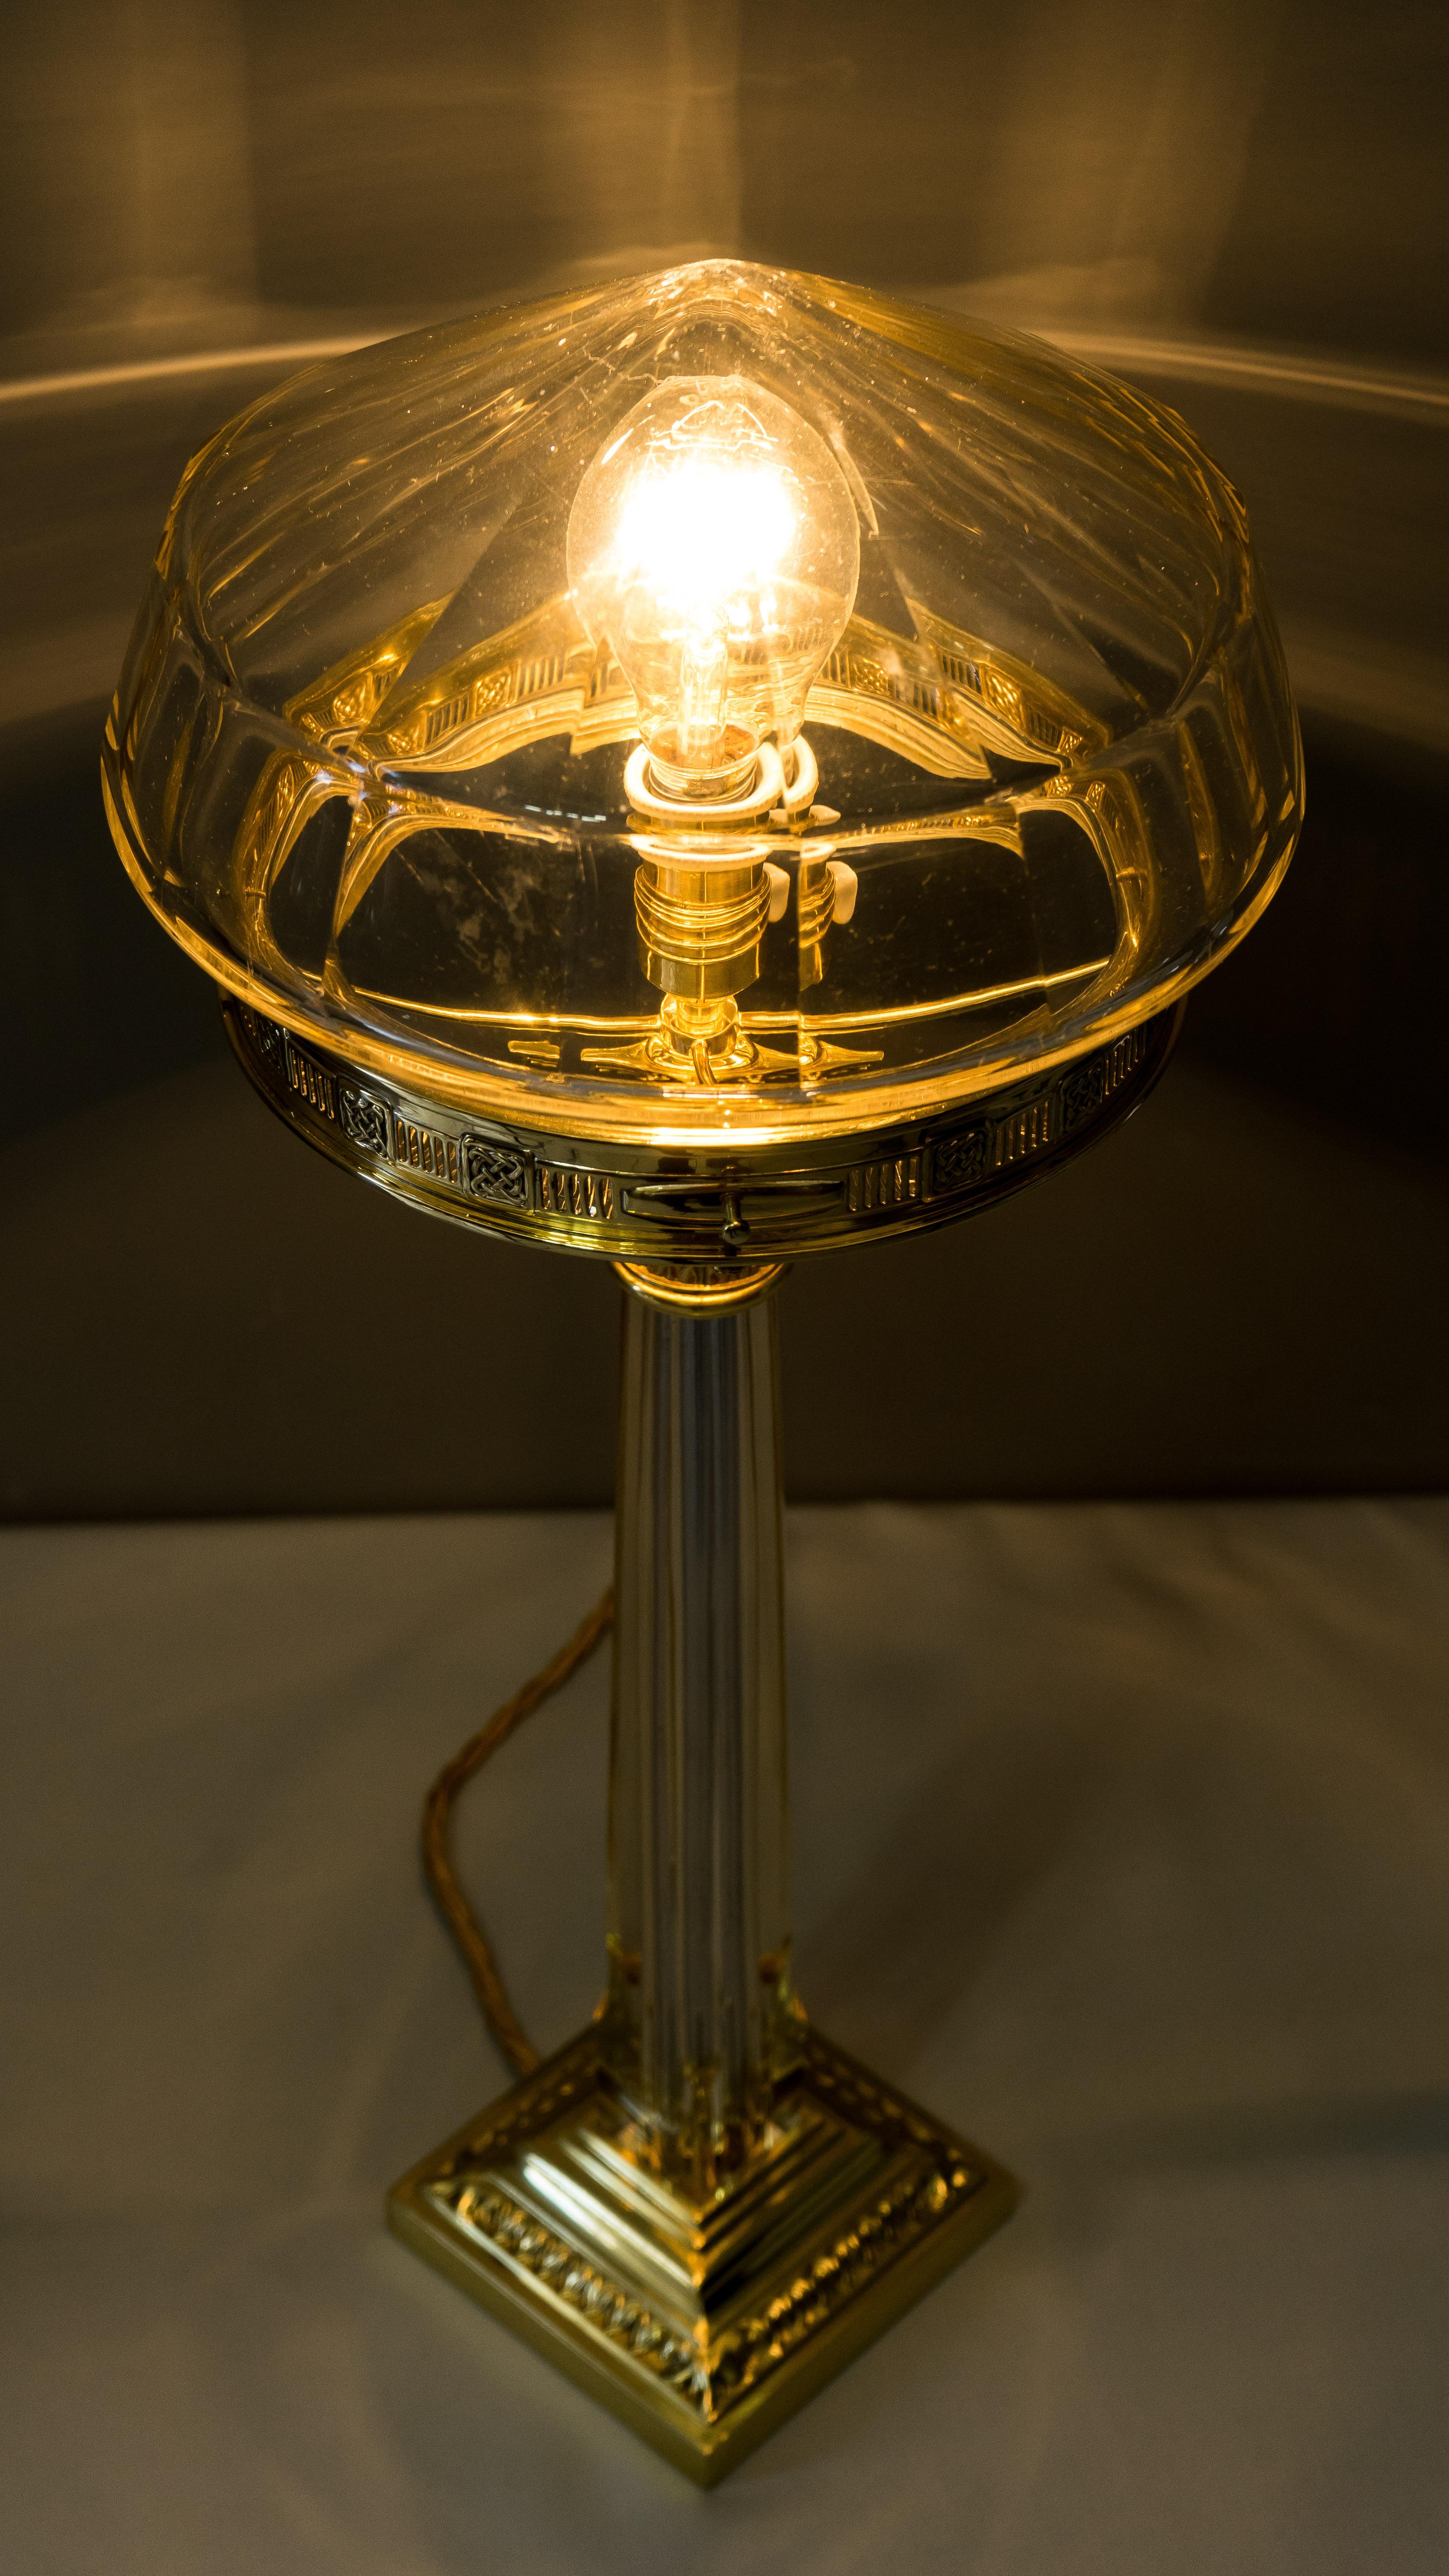 Big Jugendstil Table Lamp with Cut Glass Shade, Vienna, 1908s For Sale 4